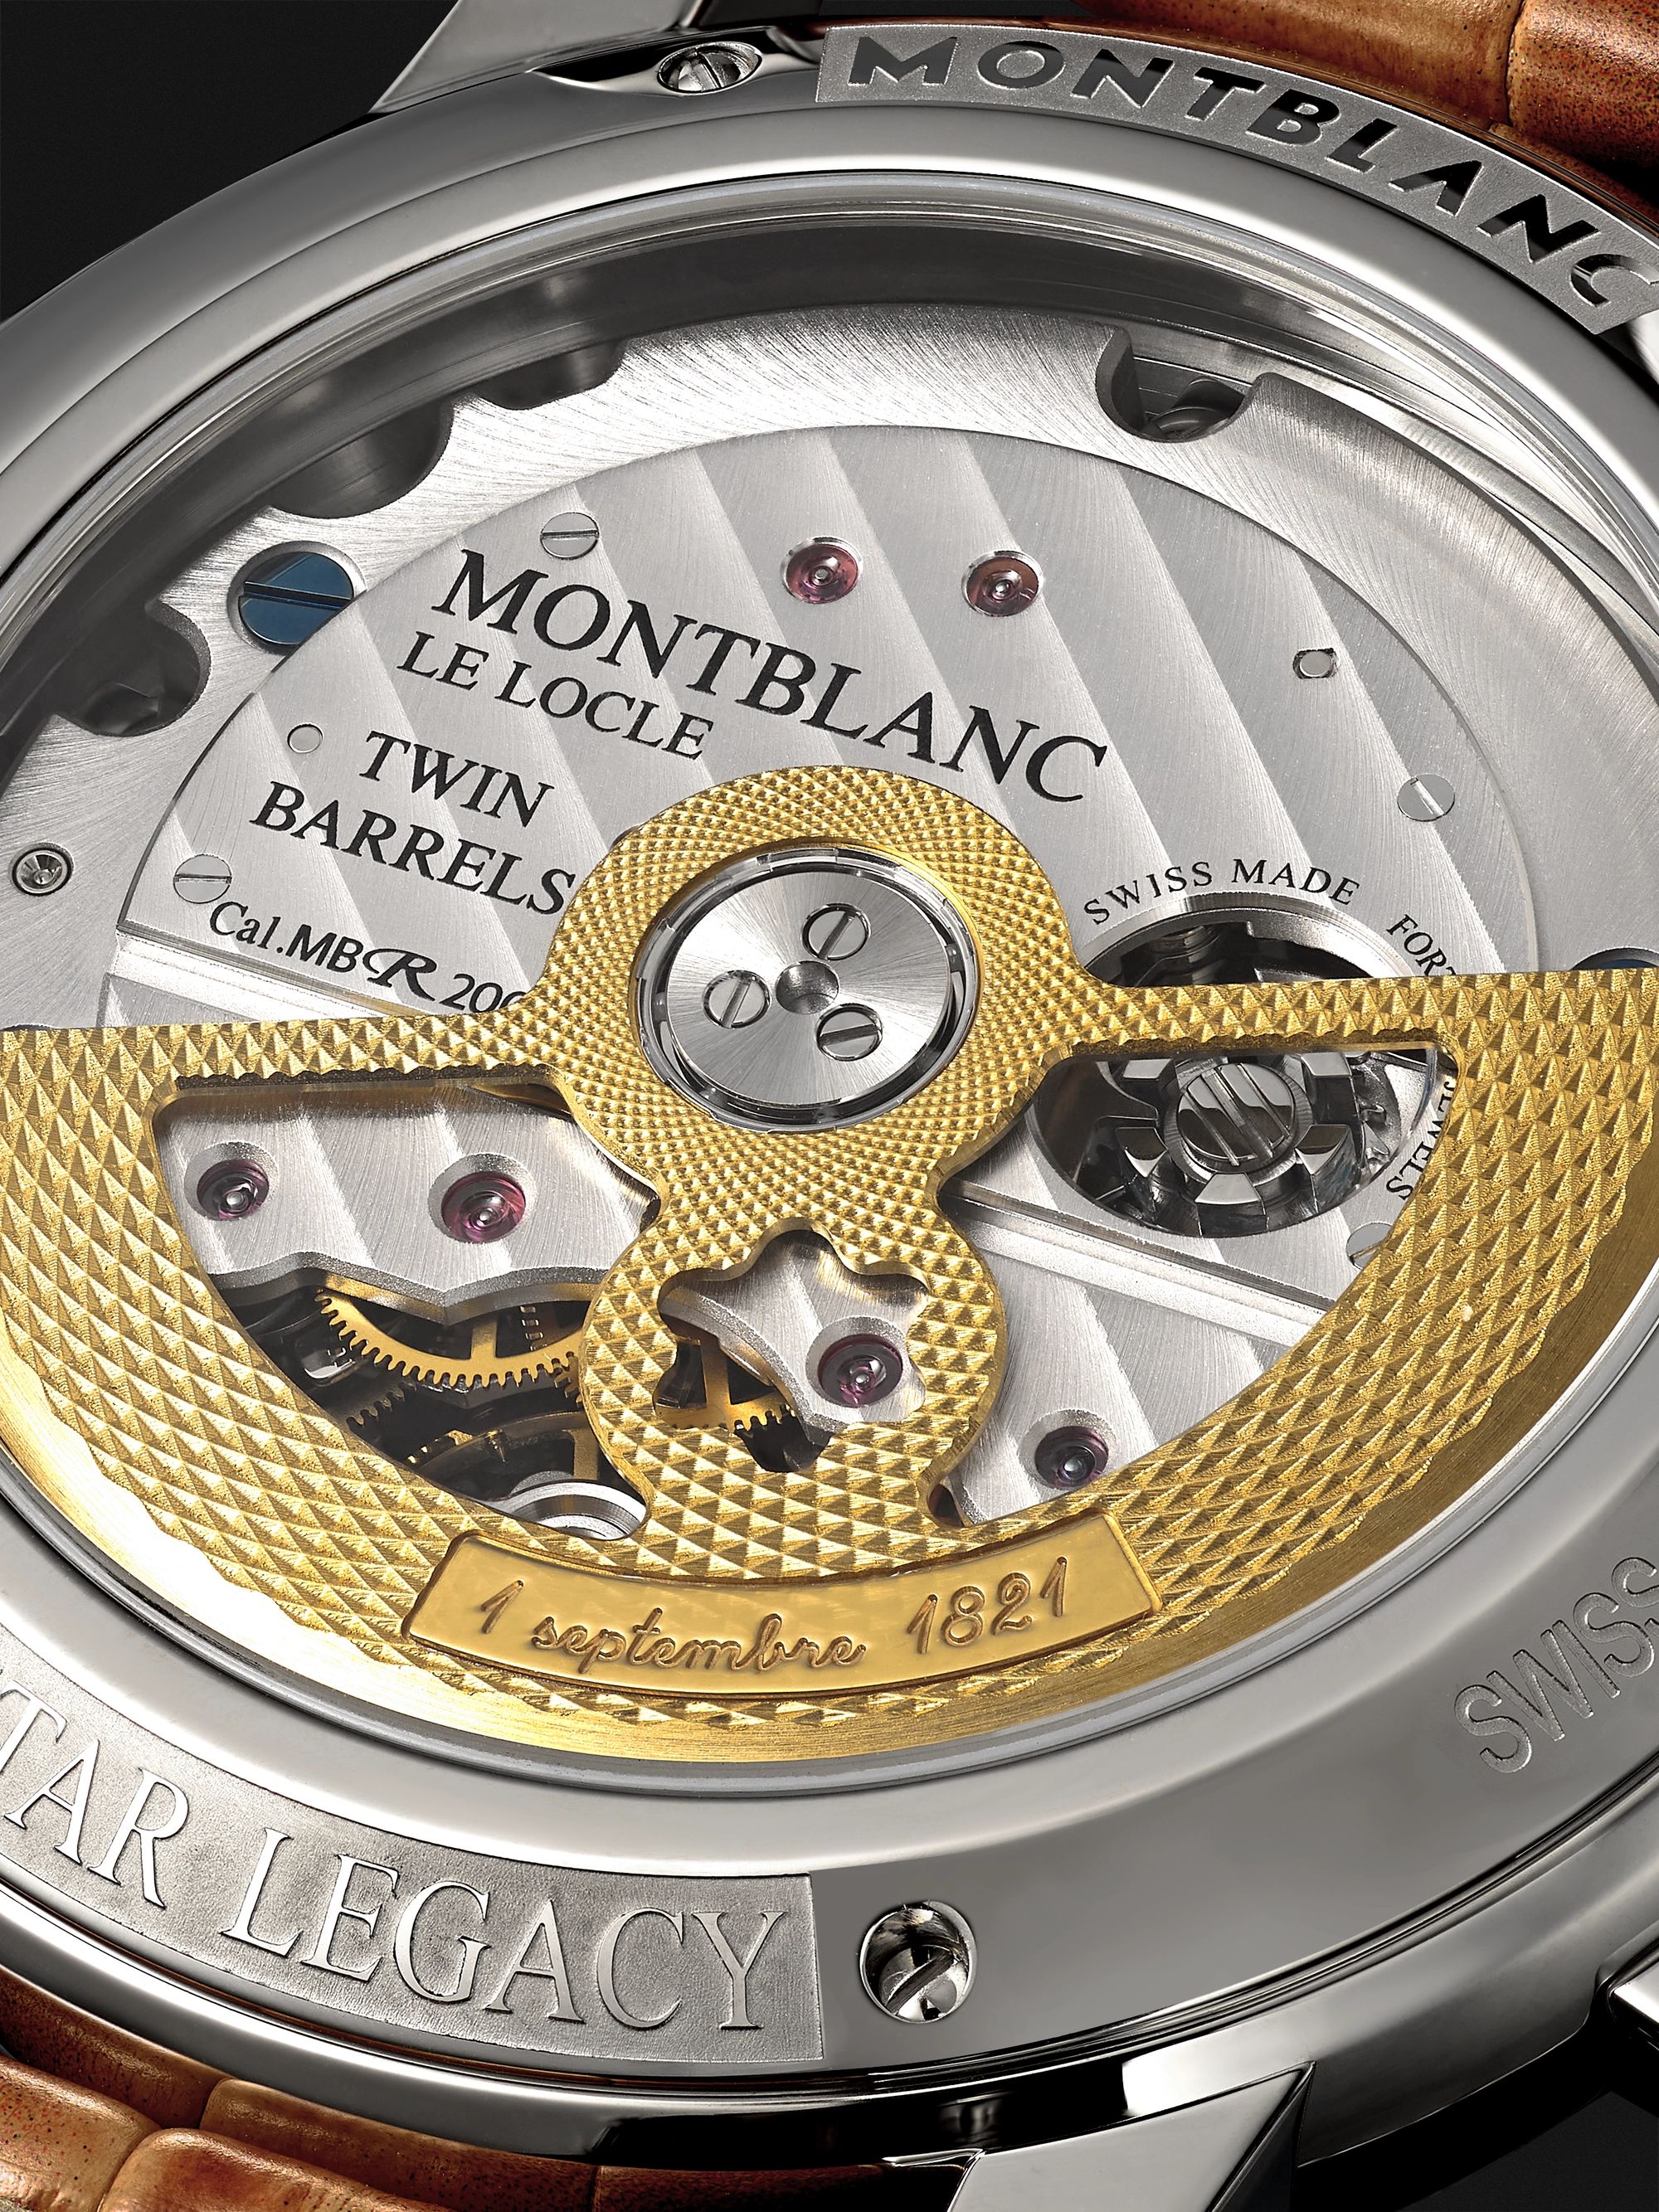 MONTBLANC Star Legacy Nicolas Rieussec Limited Edition Automatic Chronograph 44.8mm Stainless Steel and Alligator Watch, Ref. No. 128674